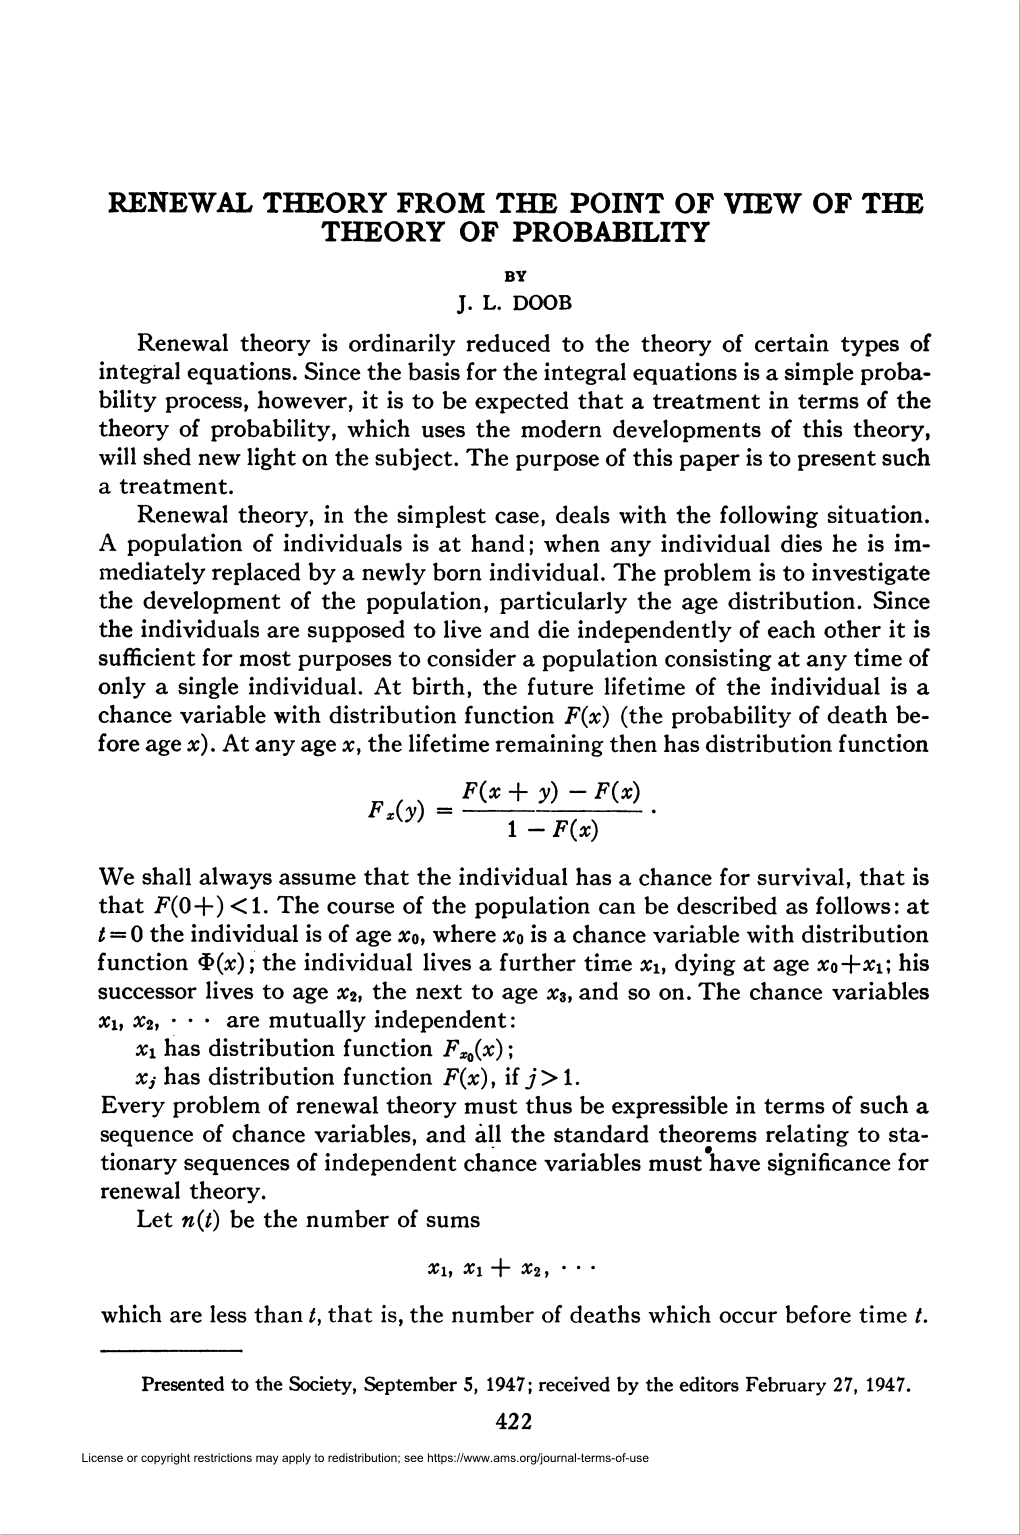 Renewal Theory from the Point of View of the Theory of Probability